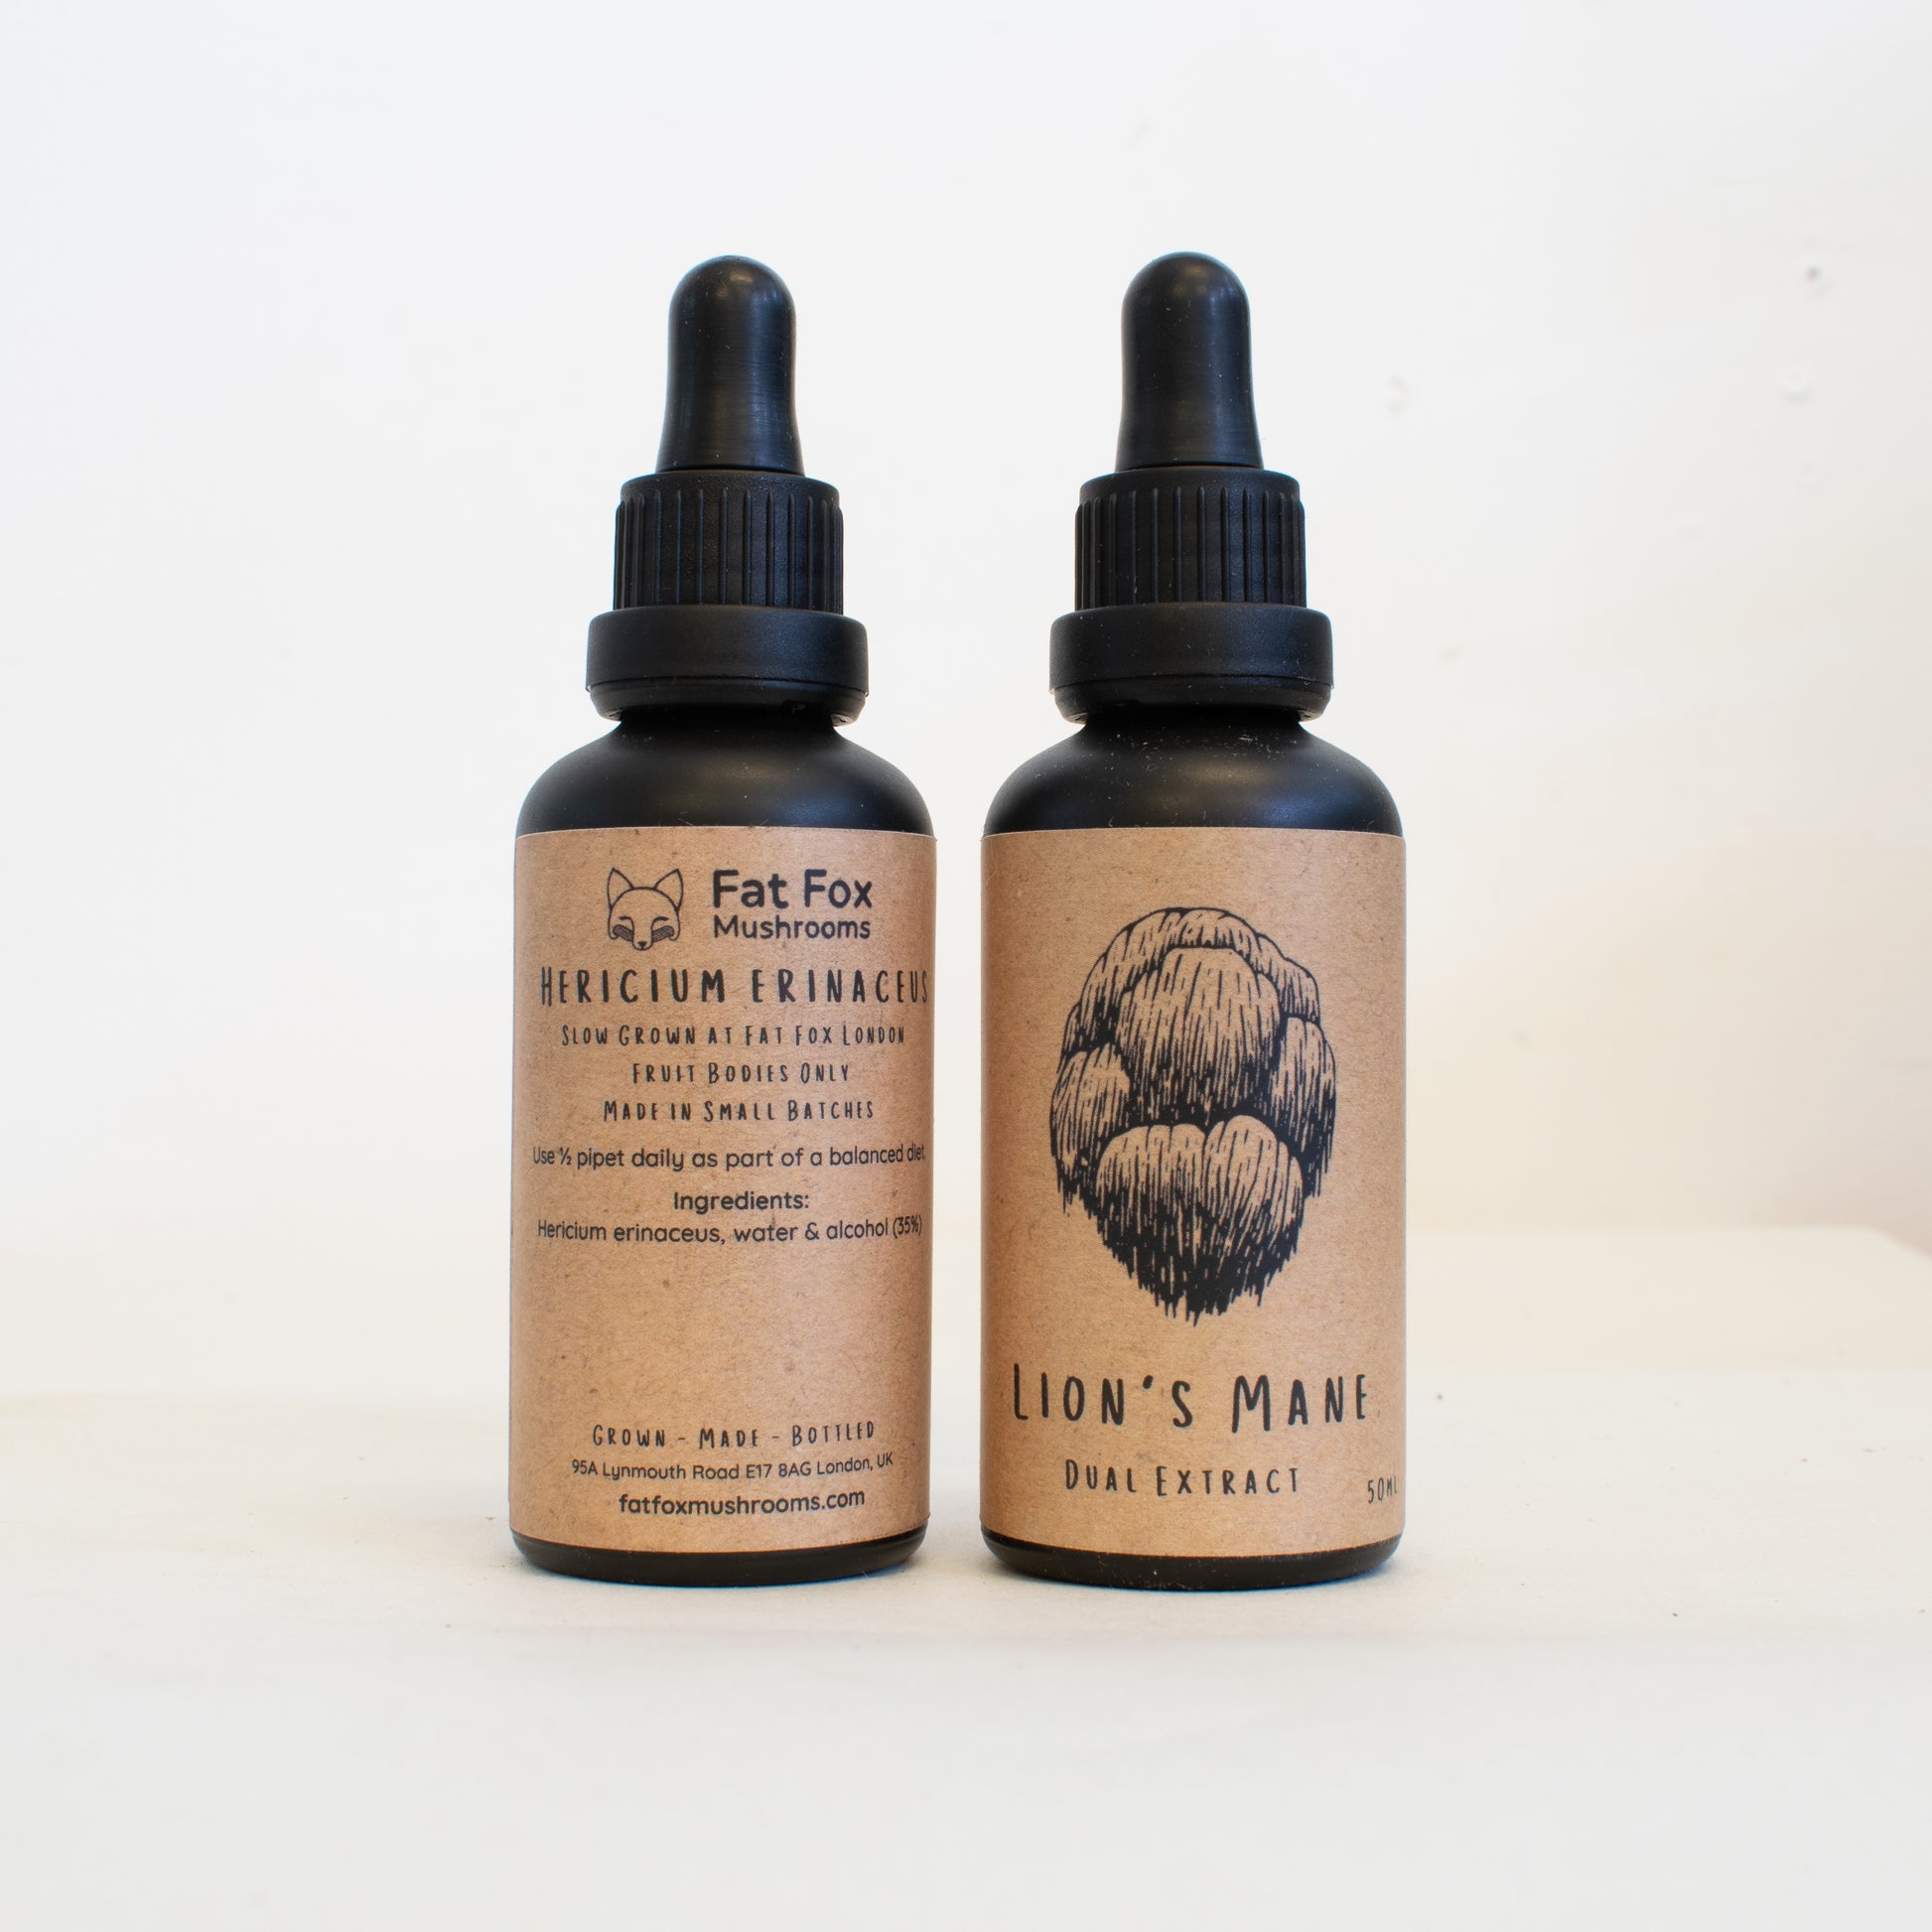 Lion's Mane dual-extract tinctures made by Fat Fox Mushrooms.